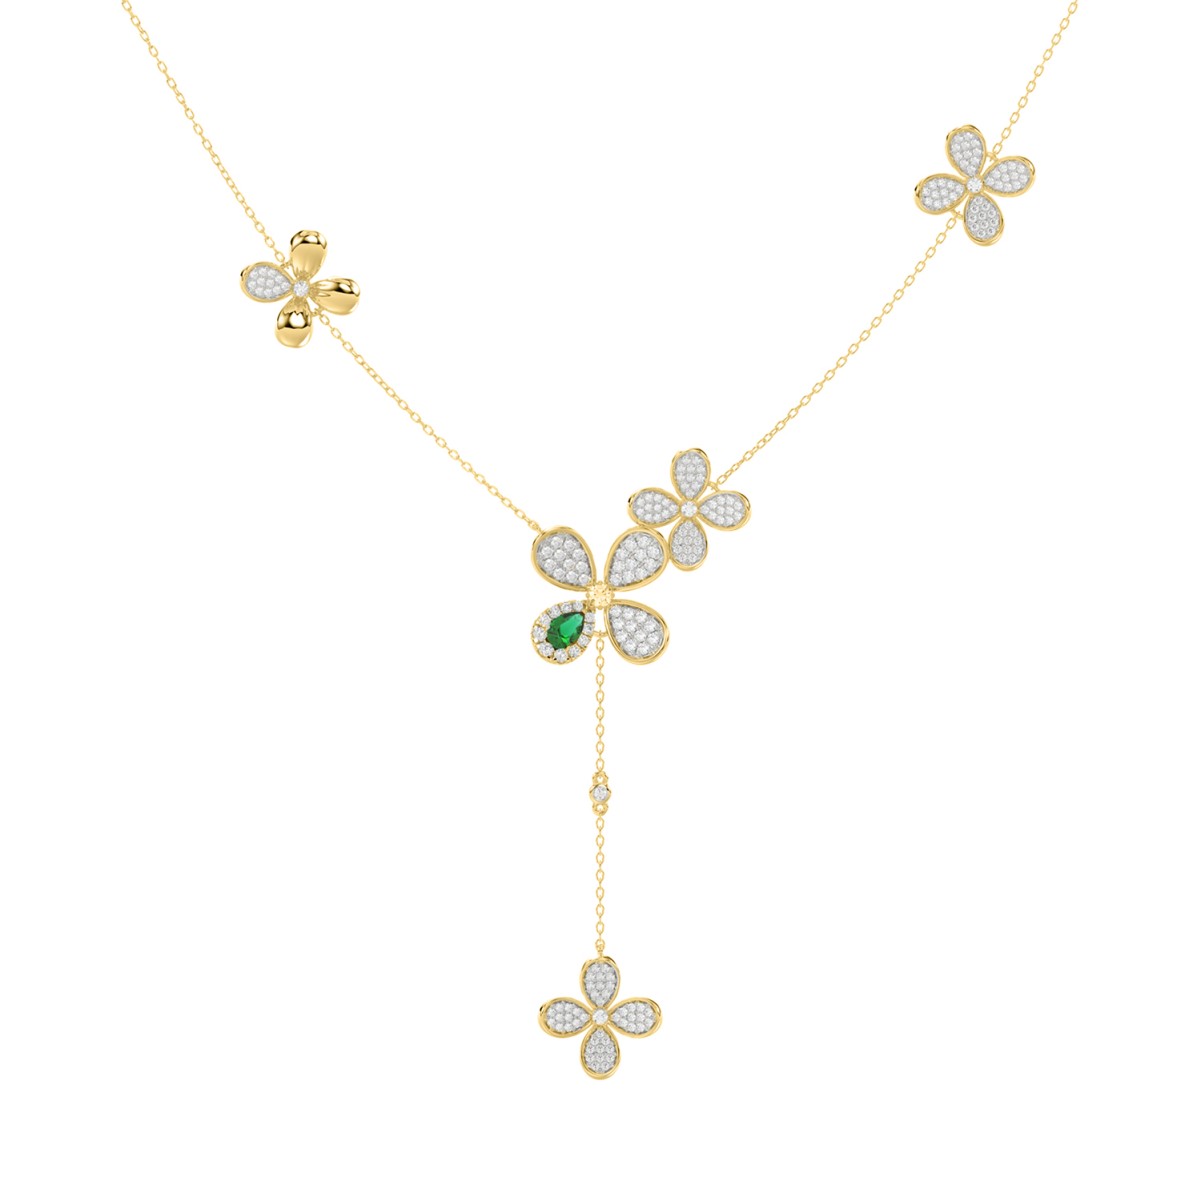 18K YELLOW GOLD 1CT ROUND/PEAR DIAMOND LADIES NECKLACE(COLOR STONE PEAR GREEN EMERALD DIAMOND 1 1/6CT)